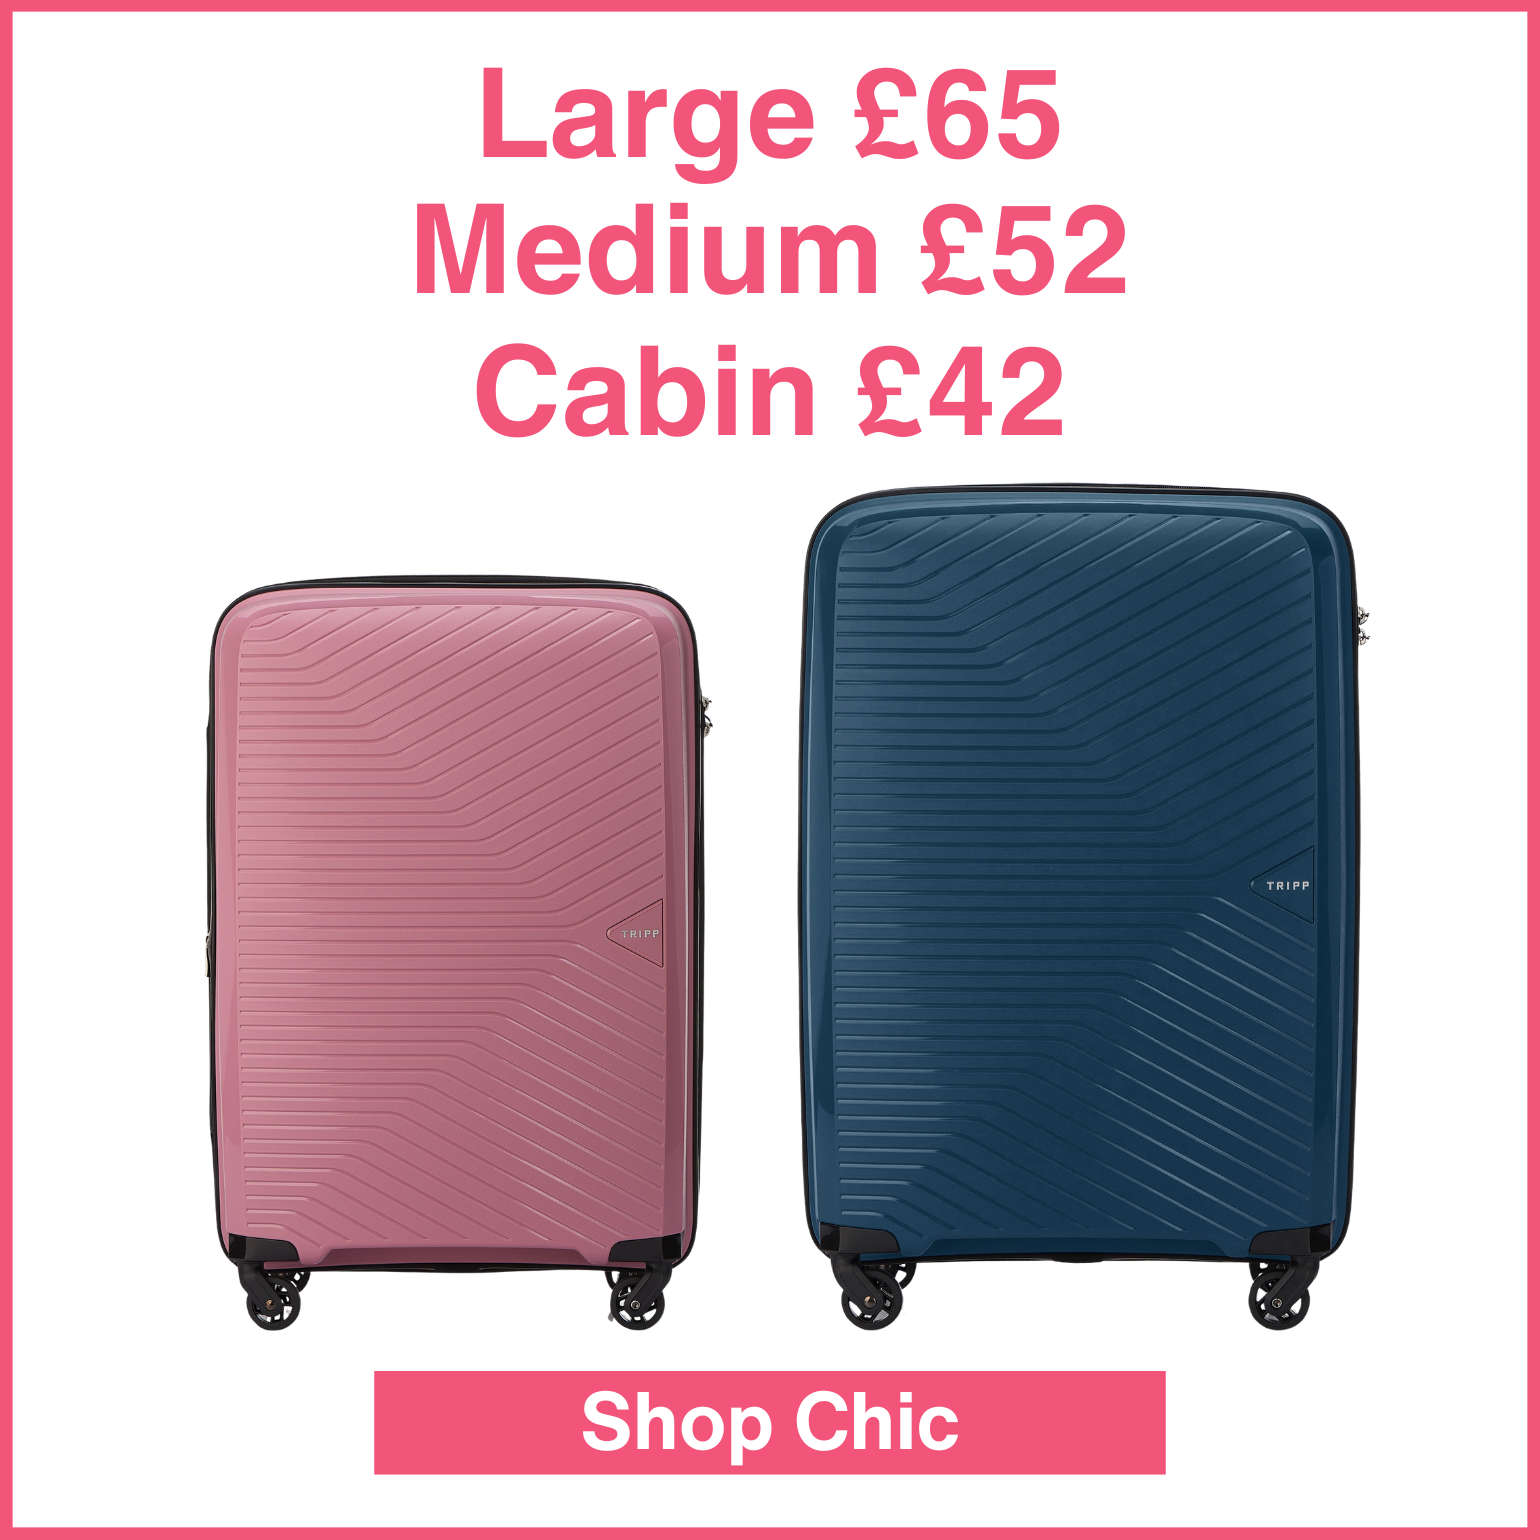 tripp luggage: Sale now on plus enjoy up to 60% off ex-display stock! |  Milled